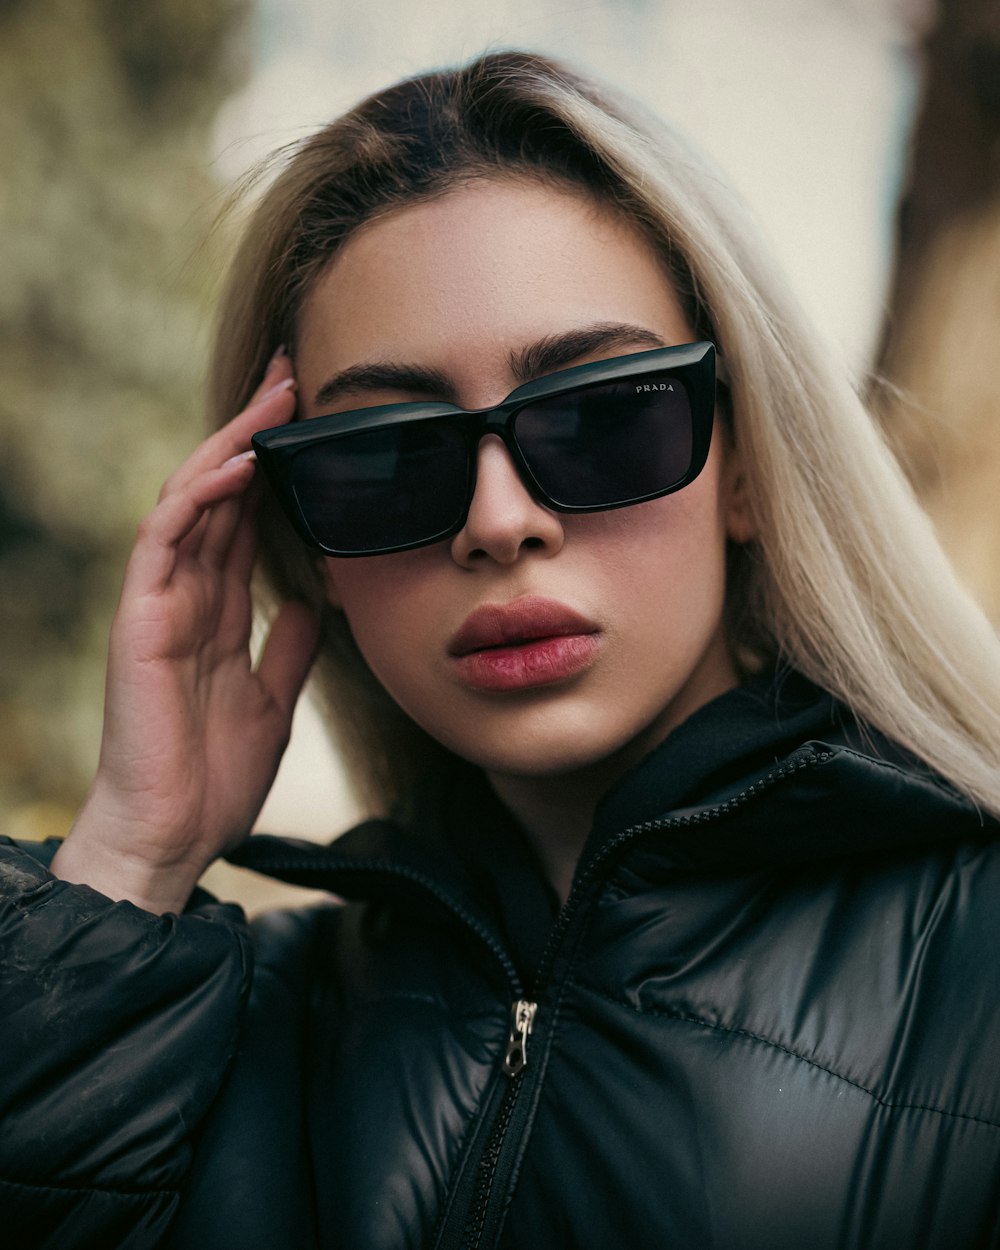 a woman wearing sunglasses and a black jacket